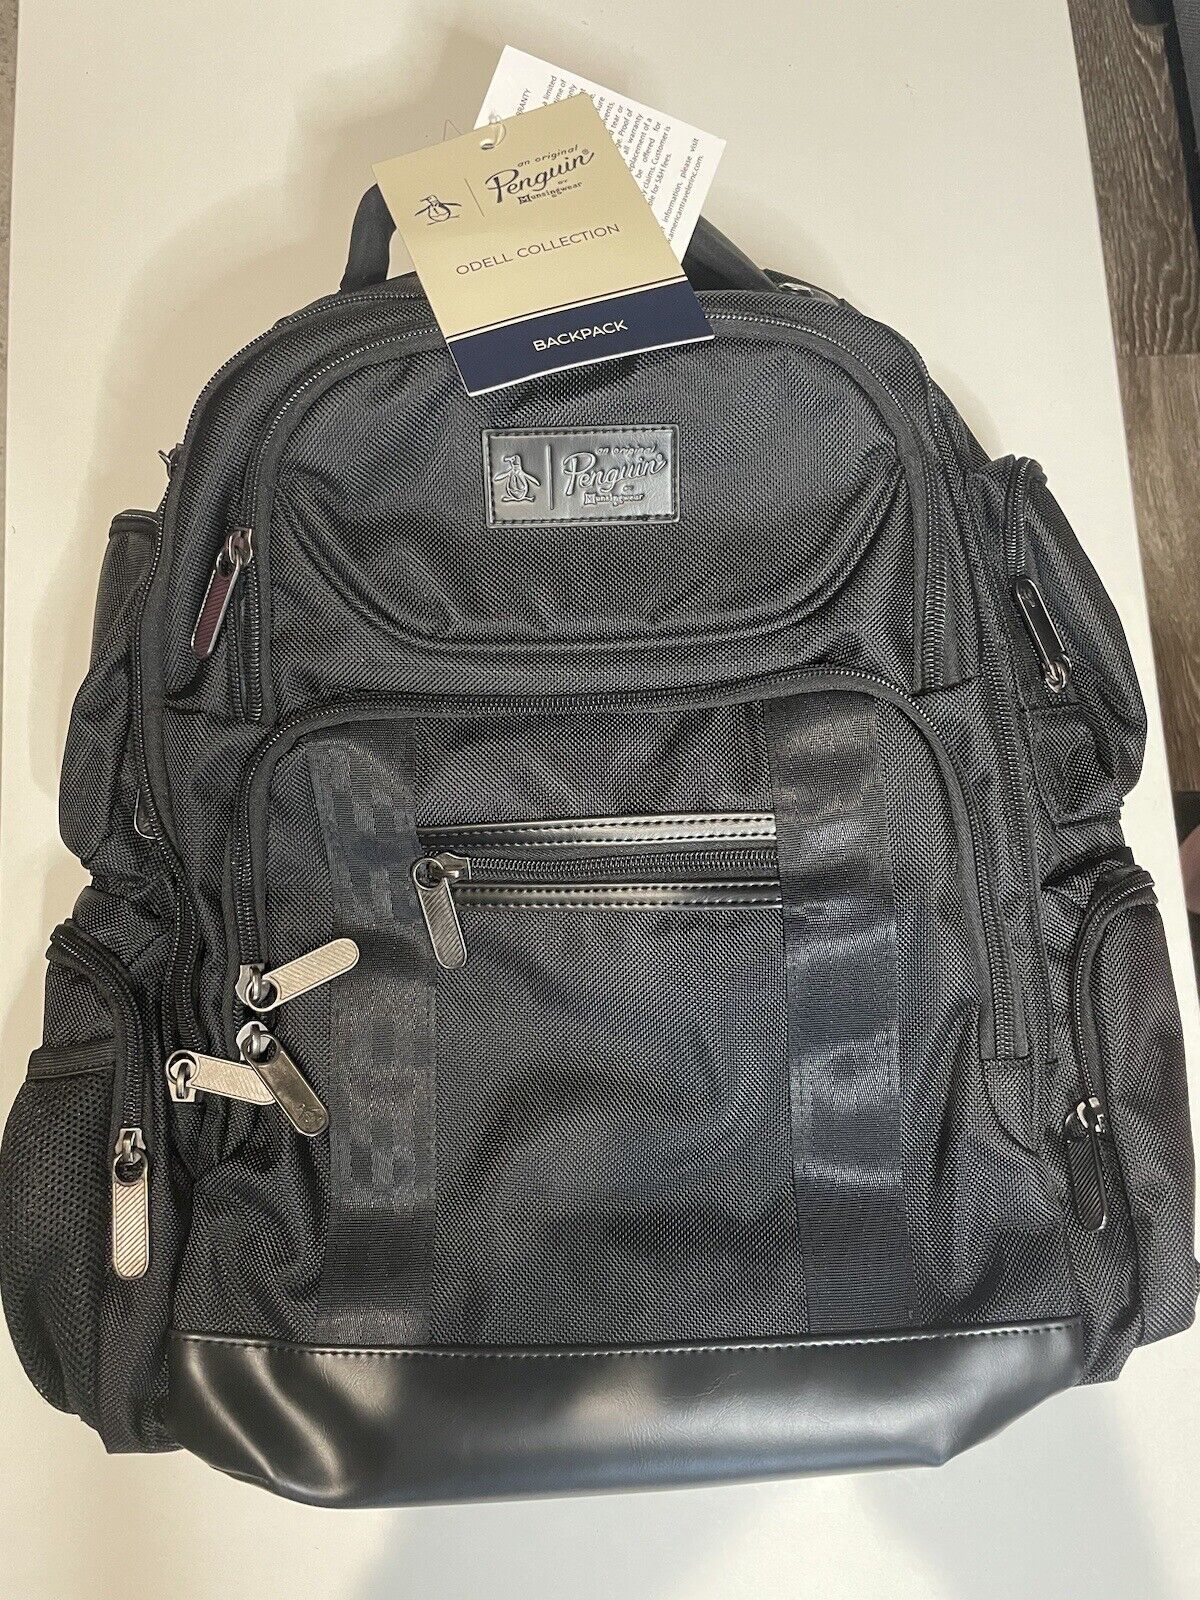 Original Penguin Odell Collection Backpack Great for College or Travel